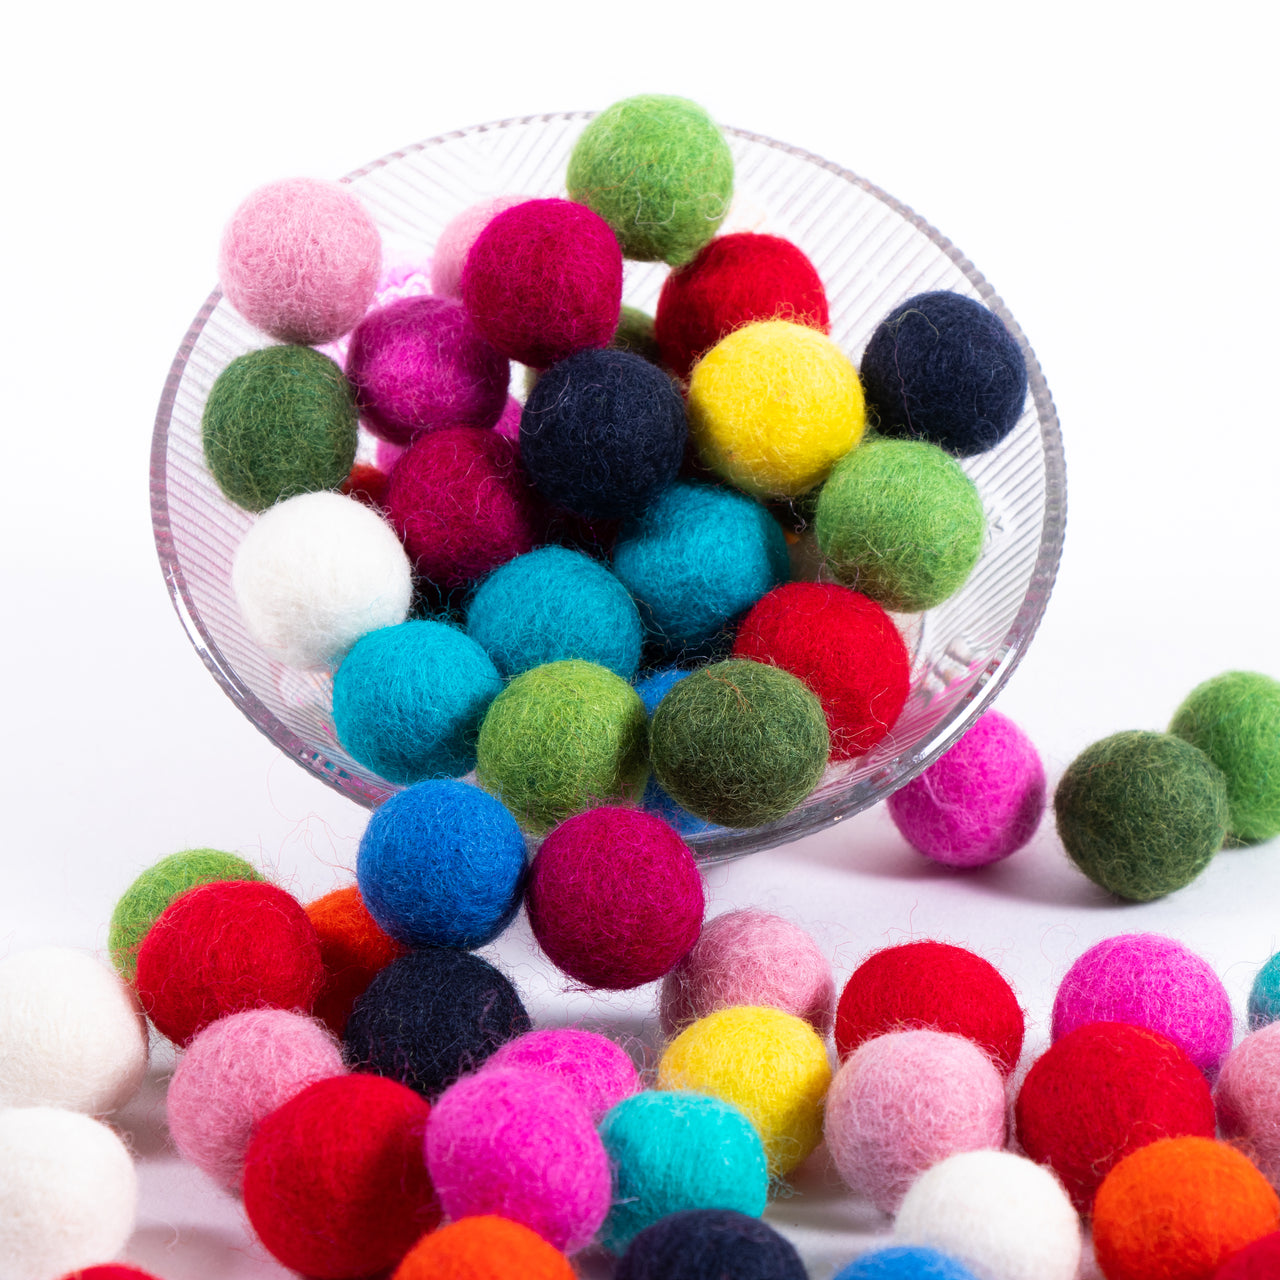 Luckforest Natural Wool Felt Balls Pom Poms, 30 Pcs 15 Colors for Crafts, Garland, Felting, Baby Mobile, and Decor 0.8 inch Nepalese 100% New